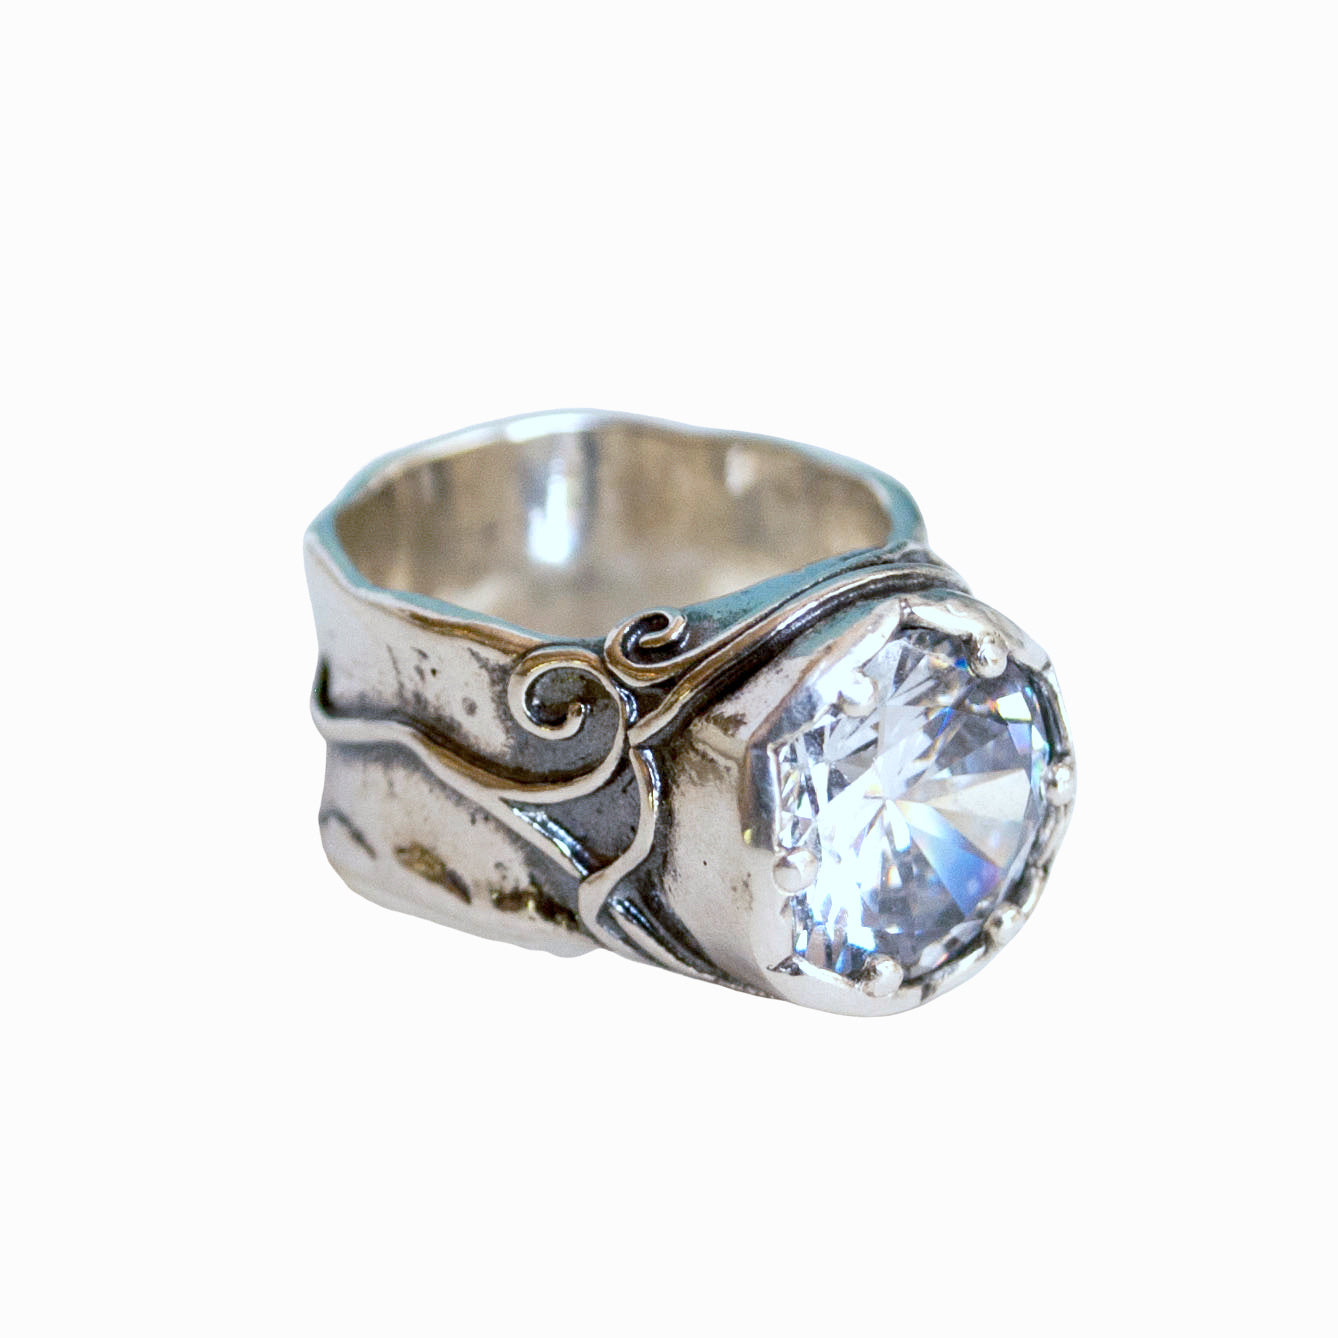 Silver Ring with large clear cz- artisan-crafted of .925 sterling silver. Whole sizes 5-10